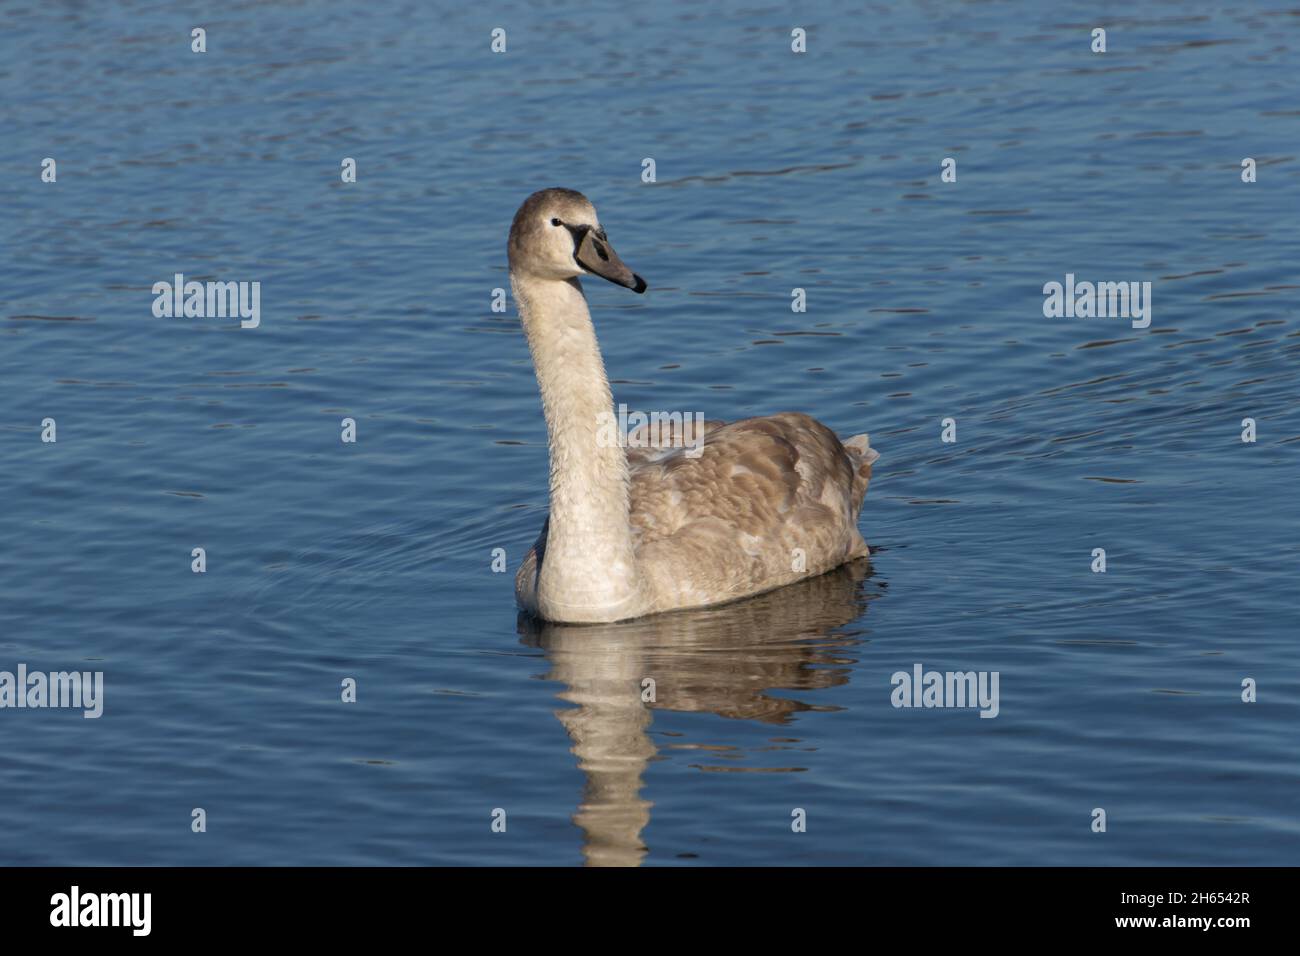 Young gray swan swimming on a lake Stock Photo